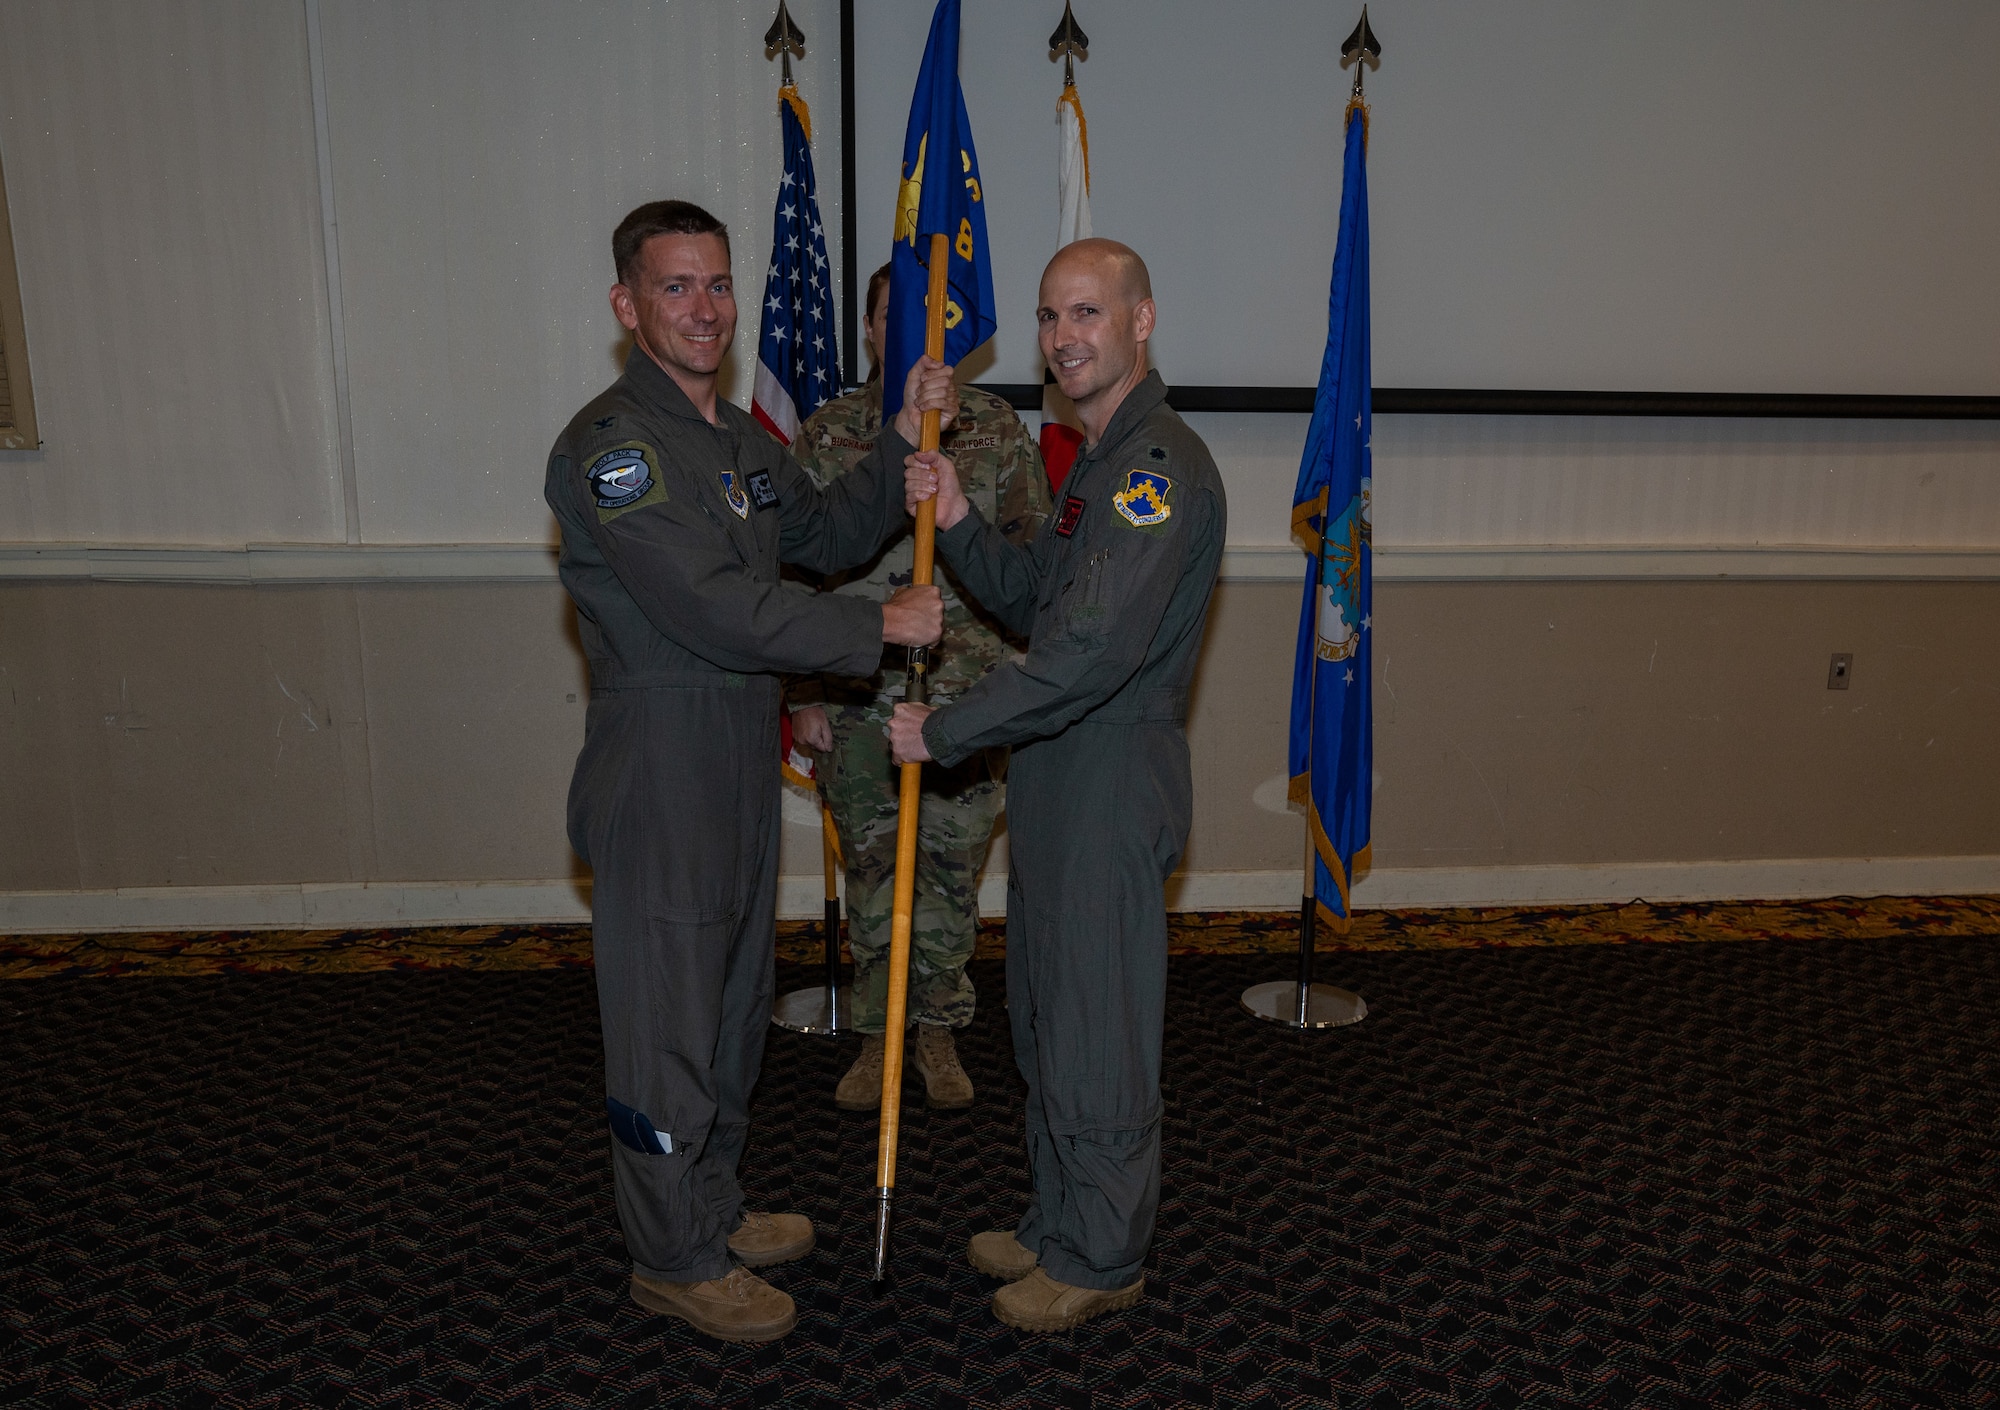 Two military members conduct a ceremony with a guidon (flag)